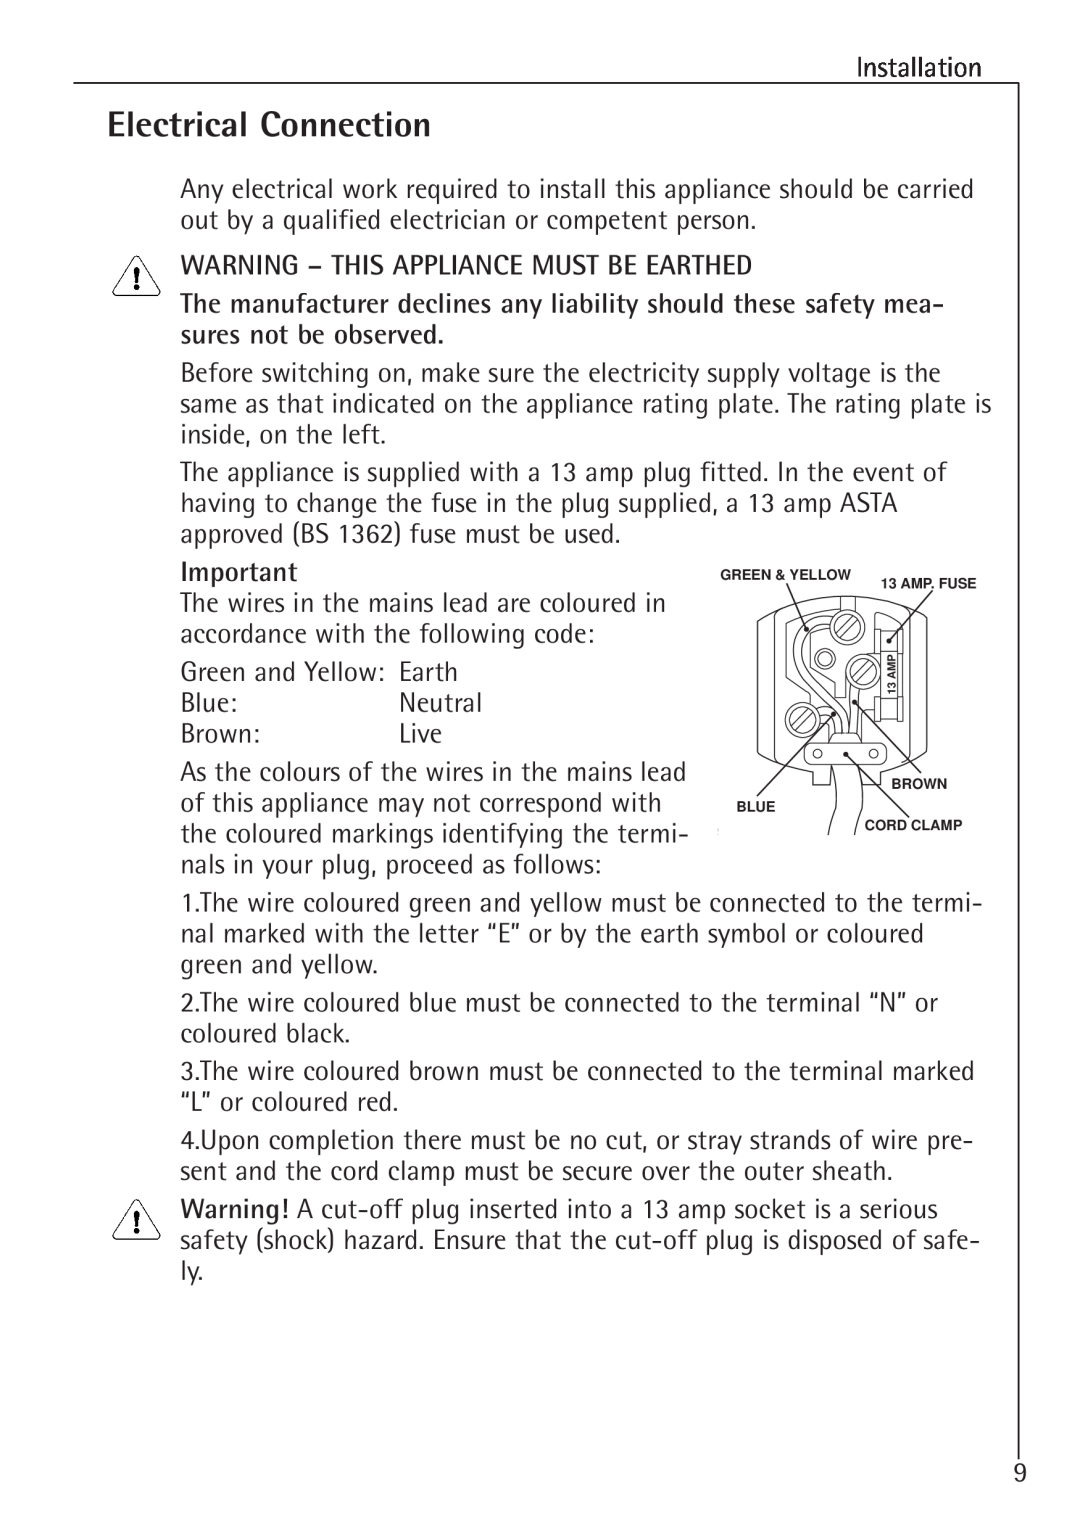 Electrolux K 91240-4 i, K 98840-4 i manual Electrical Connection, Warning - This Appliance Must Be Earthed 